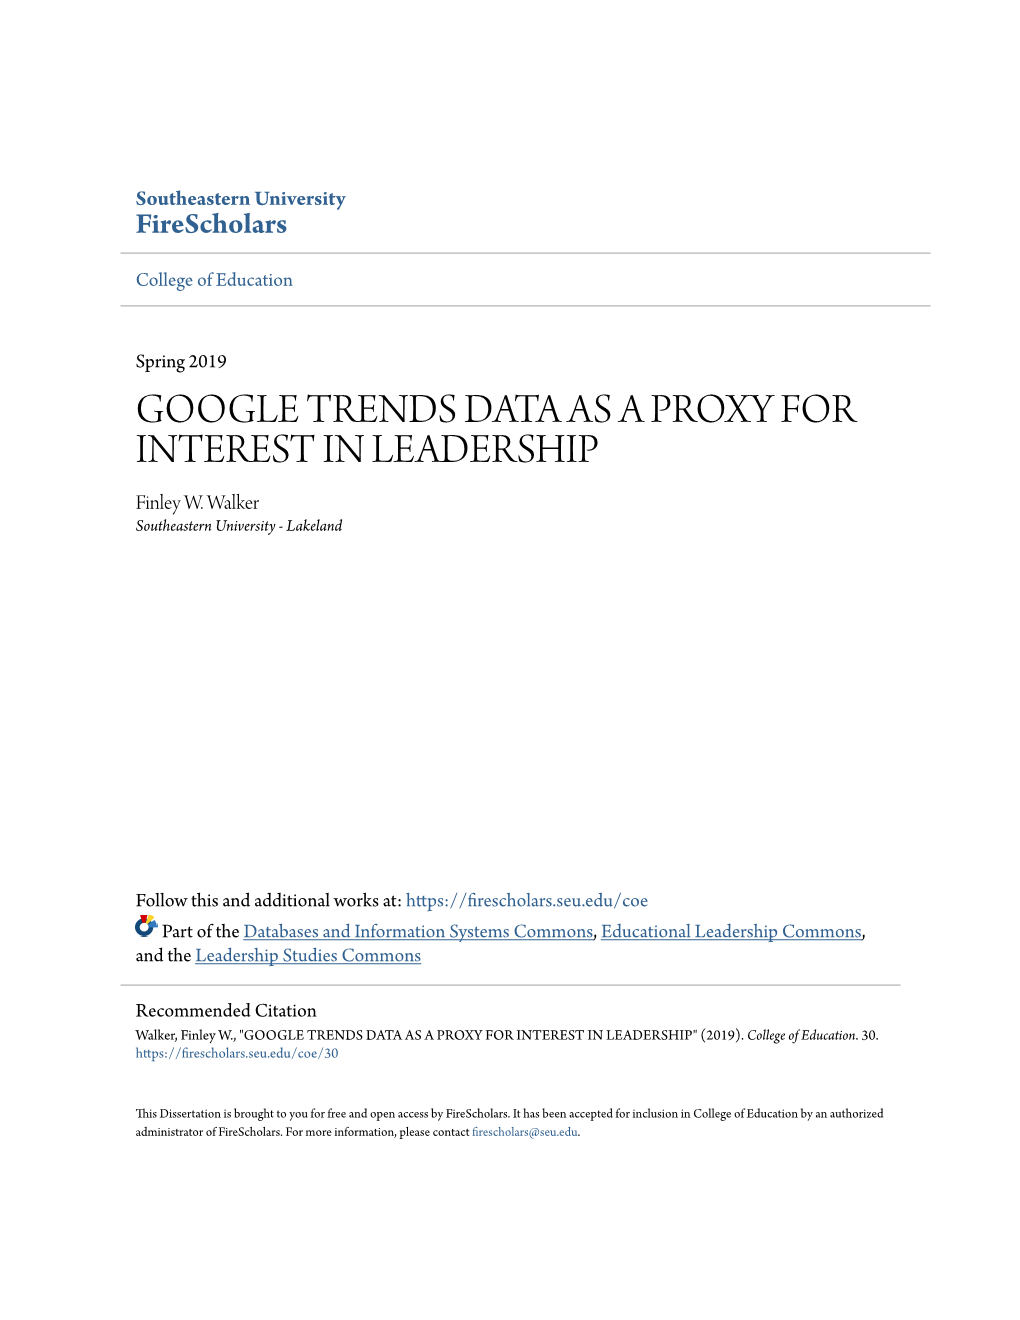 GOOGLE TRENDS DATA AS a PROXY for INTEREST in LEADERSHIP Finley W